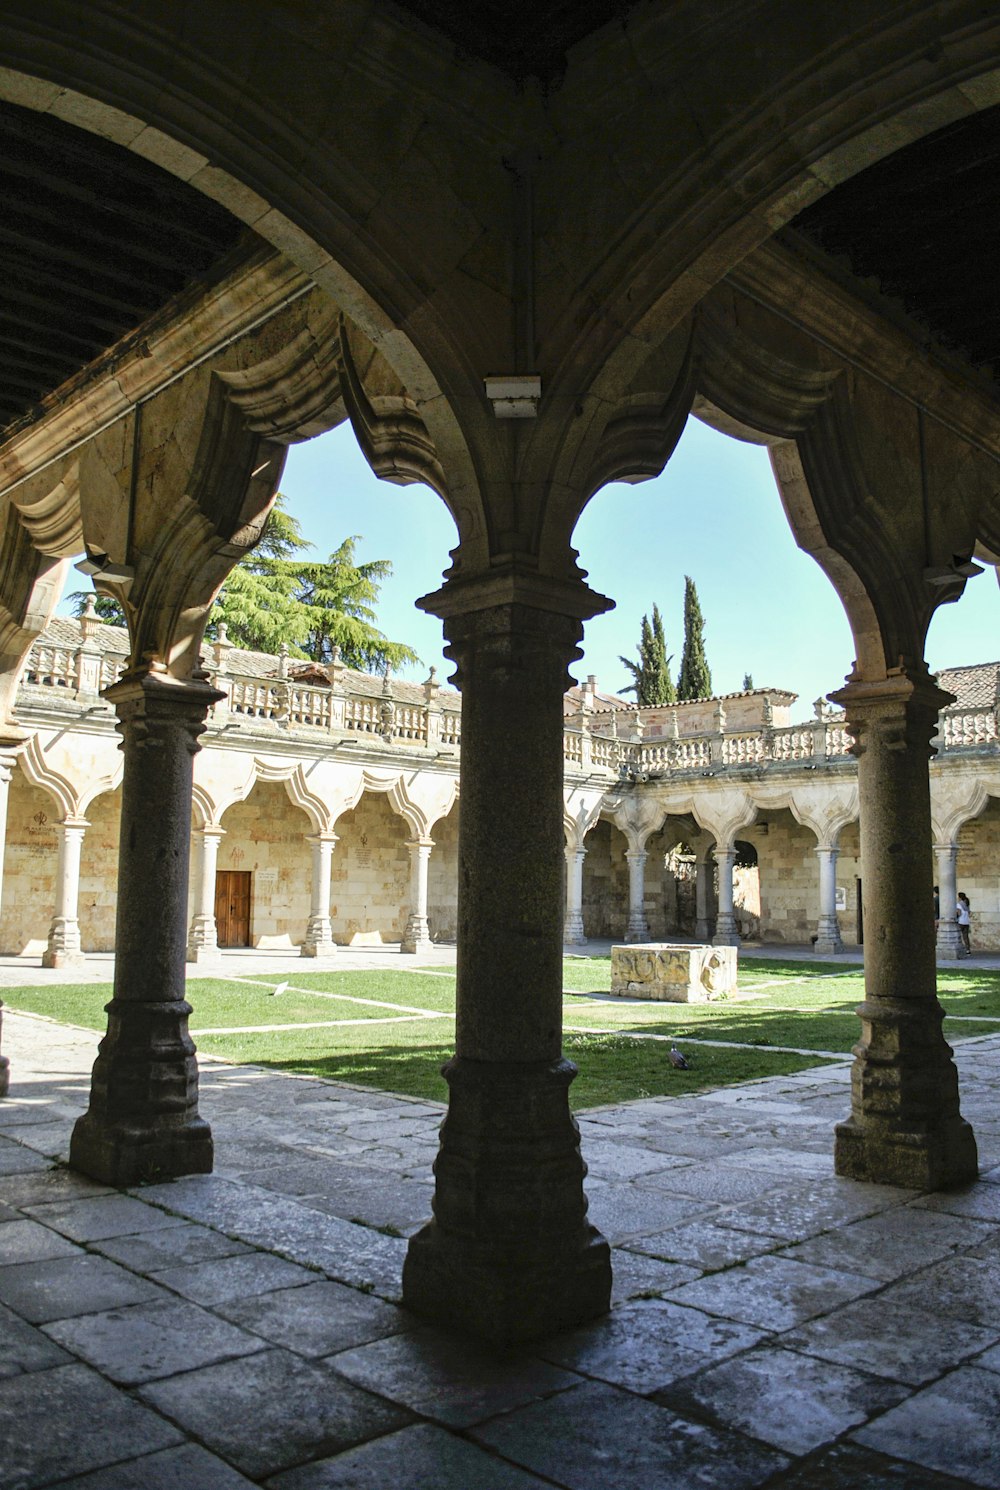 a view of a courtyard through a stone archway